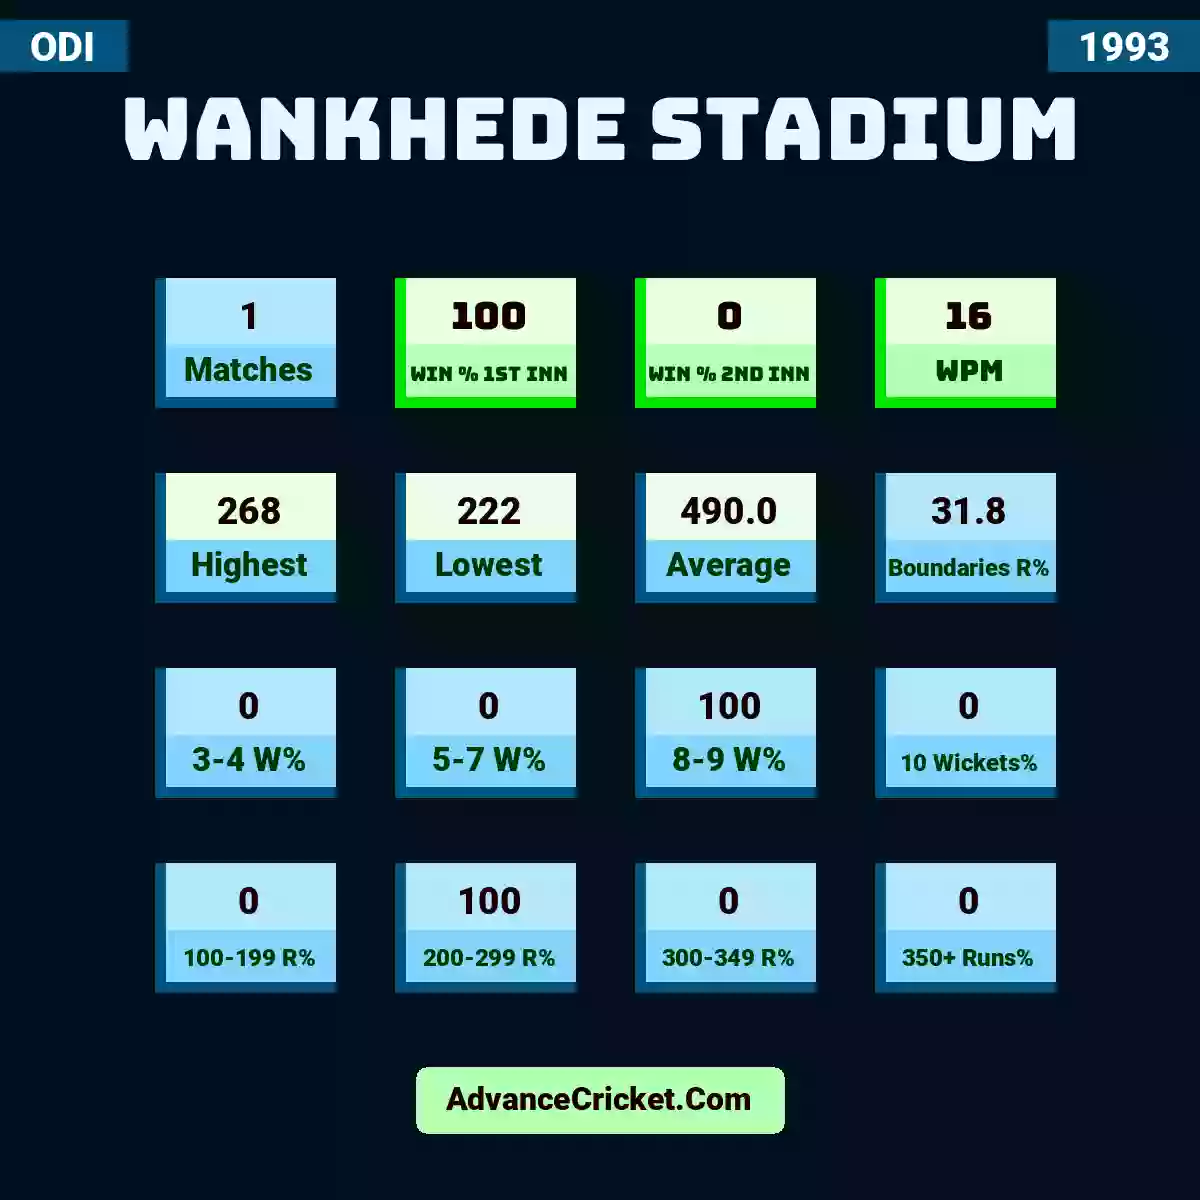 Image showing Wankhede Stadium with Matches: 1, Win % 1st Inn: 100, Win % 2nd Inn: 0, WPM: 16, Highest: 268, Lowest: 222, Average: 490.0, Boundaries R%: 31.8, 3-4 W%: 0, 5-7 W%: 0, 8-9 W%: 100, 10 Wickets%: 0, 100-199 R%: 0, 200-299 R%: 100, 300-349 R%: 0, 350+ Runs%: 0.